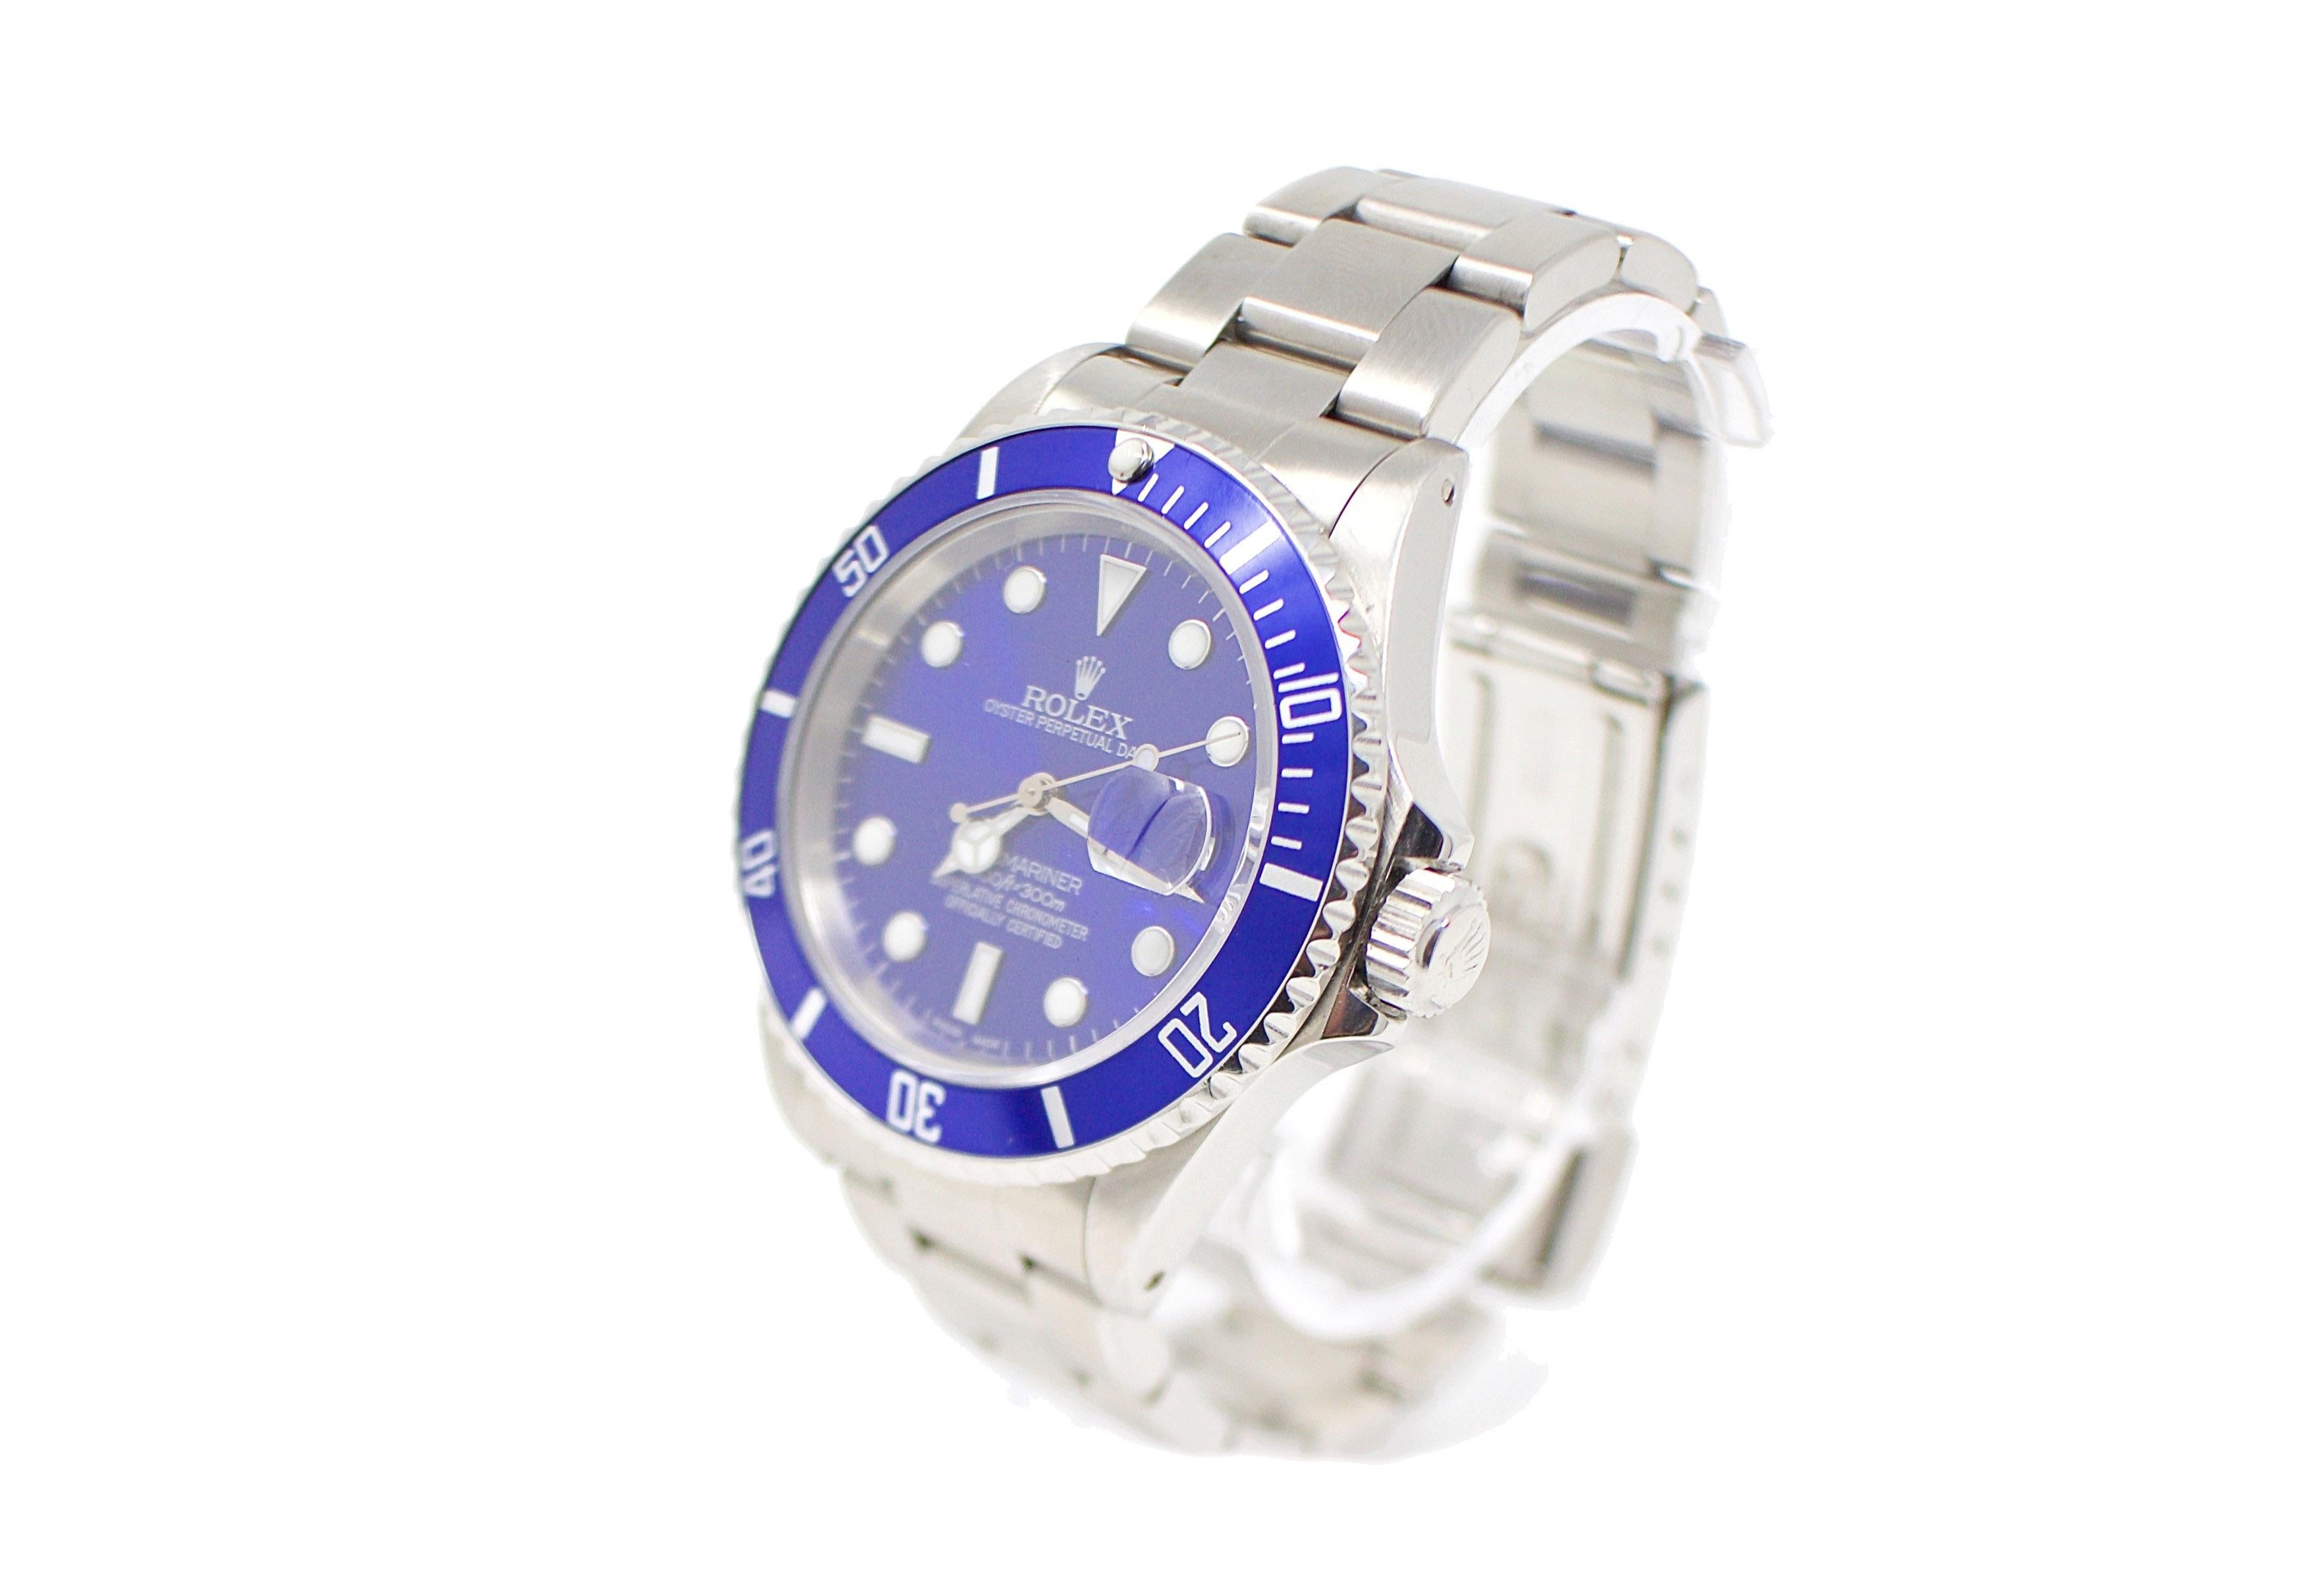 Brand - Rolex
Model - 16610 Submariner
Gender - Men's
Case Size - 40mm
Dial - Refinished Blue
Bezel - Rolex Steel ./Custom Blue 
Crystal - Saphire 
Movement - Automatic Rolex CAL.3135
Band - Steel Oyster 
Wrist Size - 8 Inches

3 Years In-House